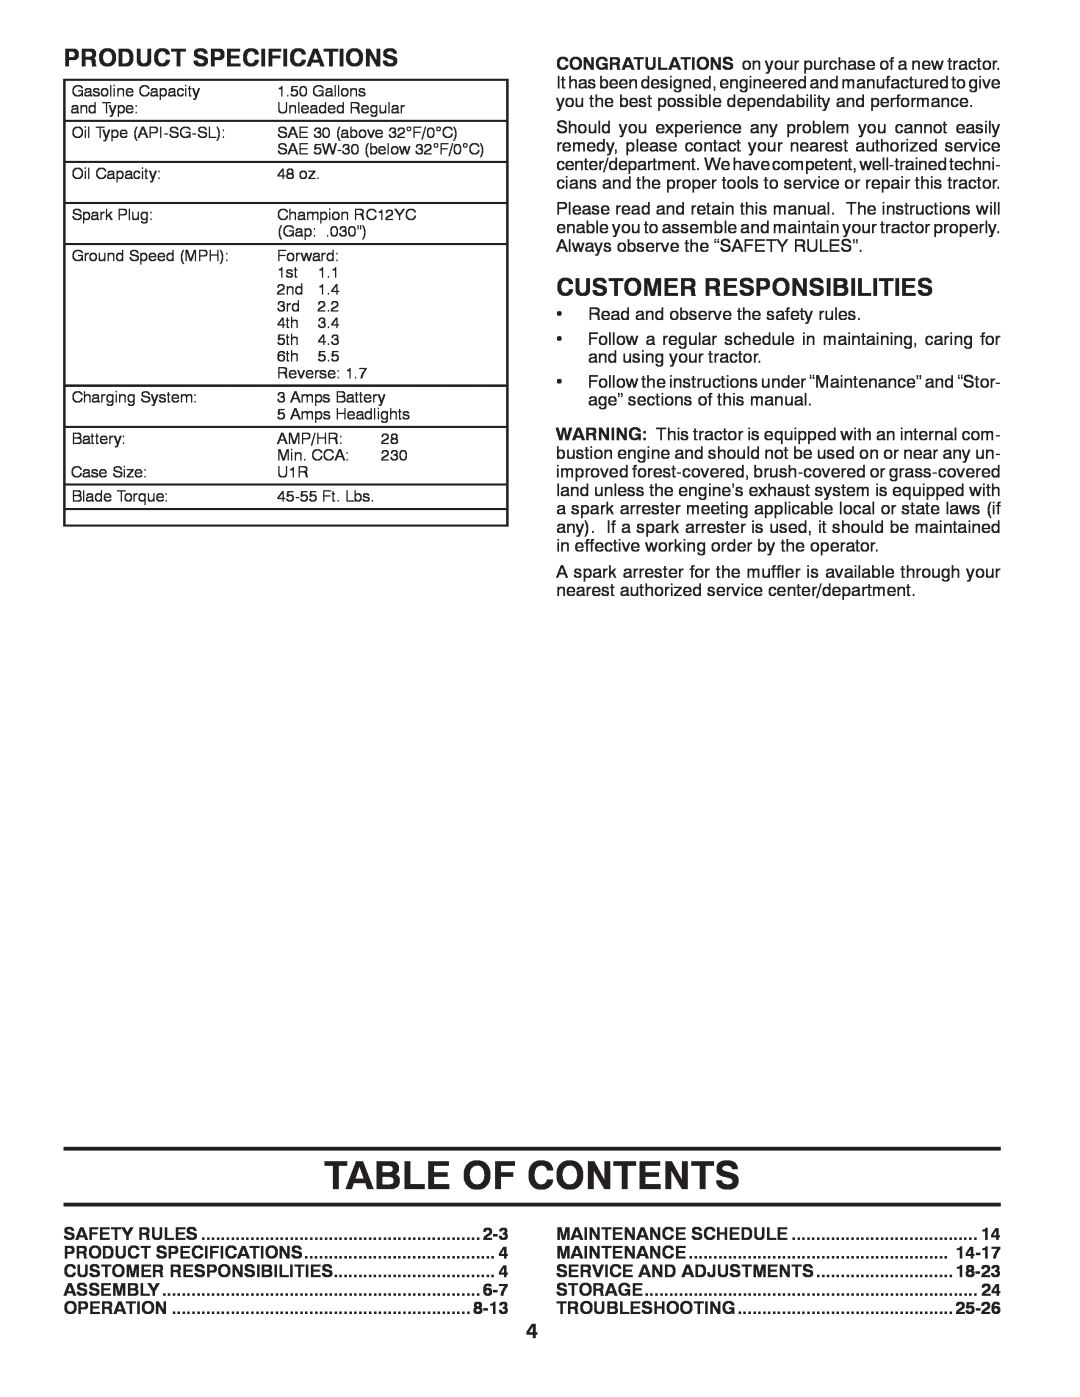 McCulloch 96041017700, 532 43 45-03 manual Table Of Contents, Product Specifications, Customer Responsibilities 